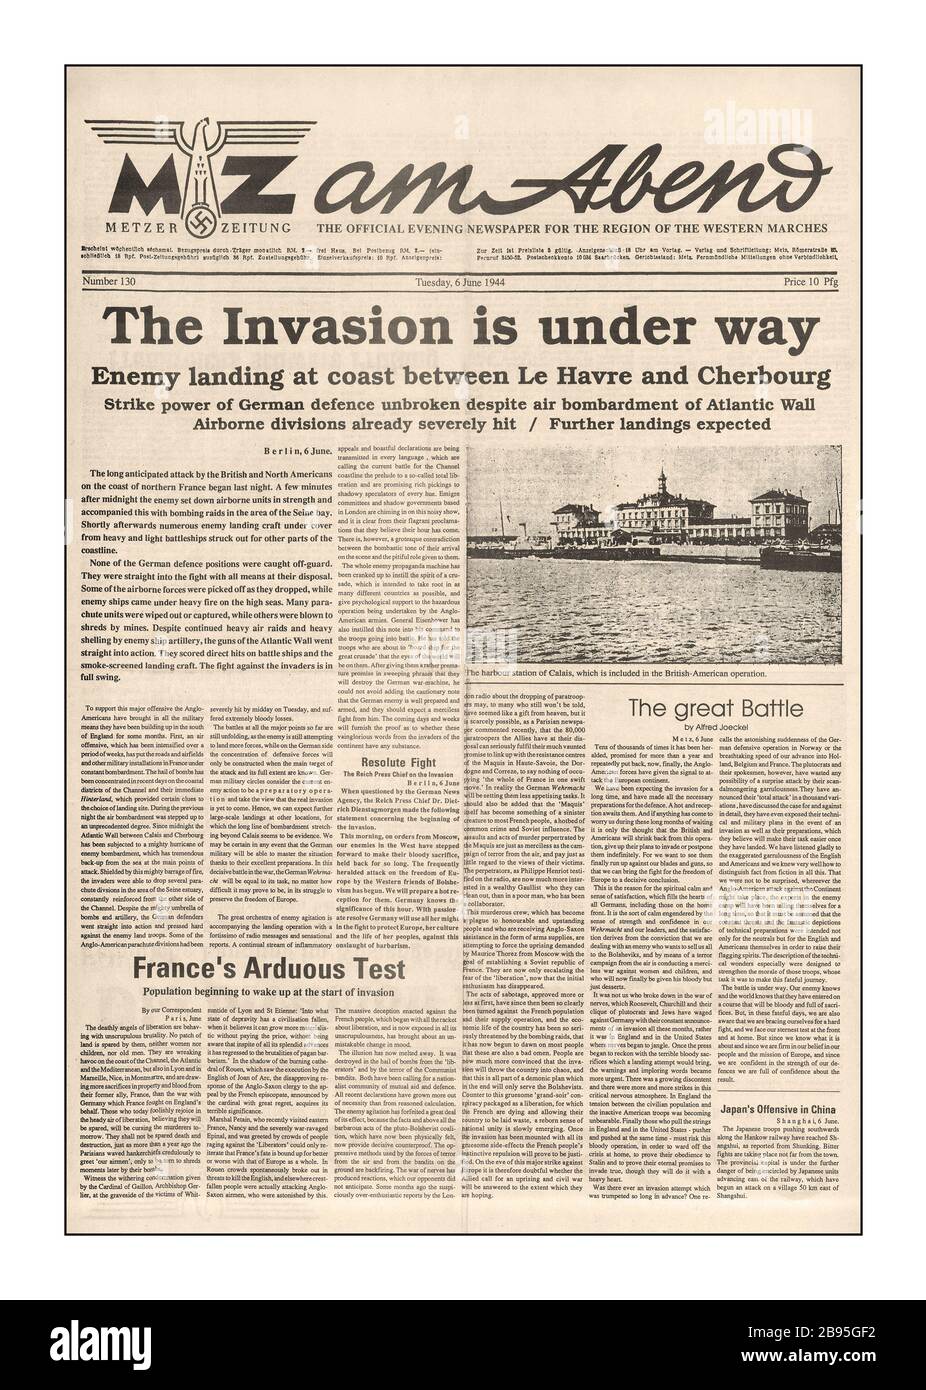 D Day Nazi Germany Propaganda June 6th 1944 Metzer Zeitung Newspaper: Page 1 in English ' THE INVASION IS UNDER WAY enemy landing at coast between Le Havre and Cherbourg' Nazi Propaganda 'fake news'  mis-information Newspaper with Swastika symbol on header banner. Stock Photo